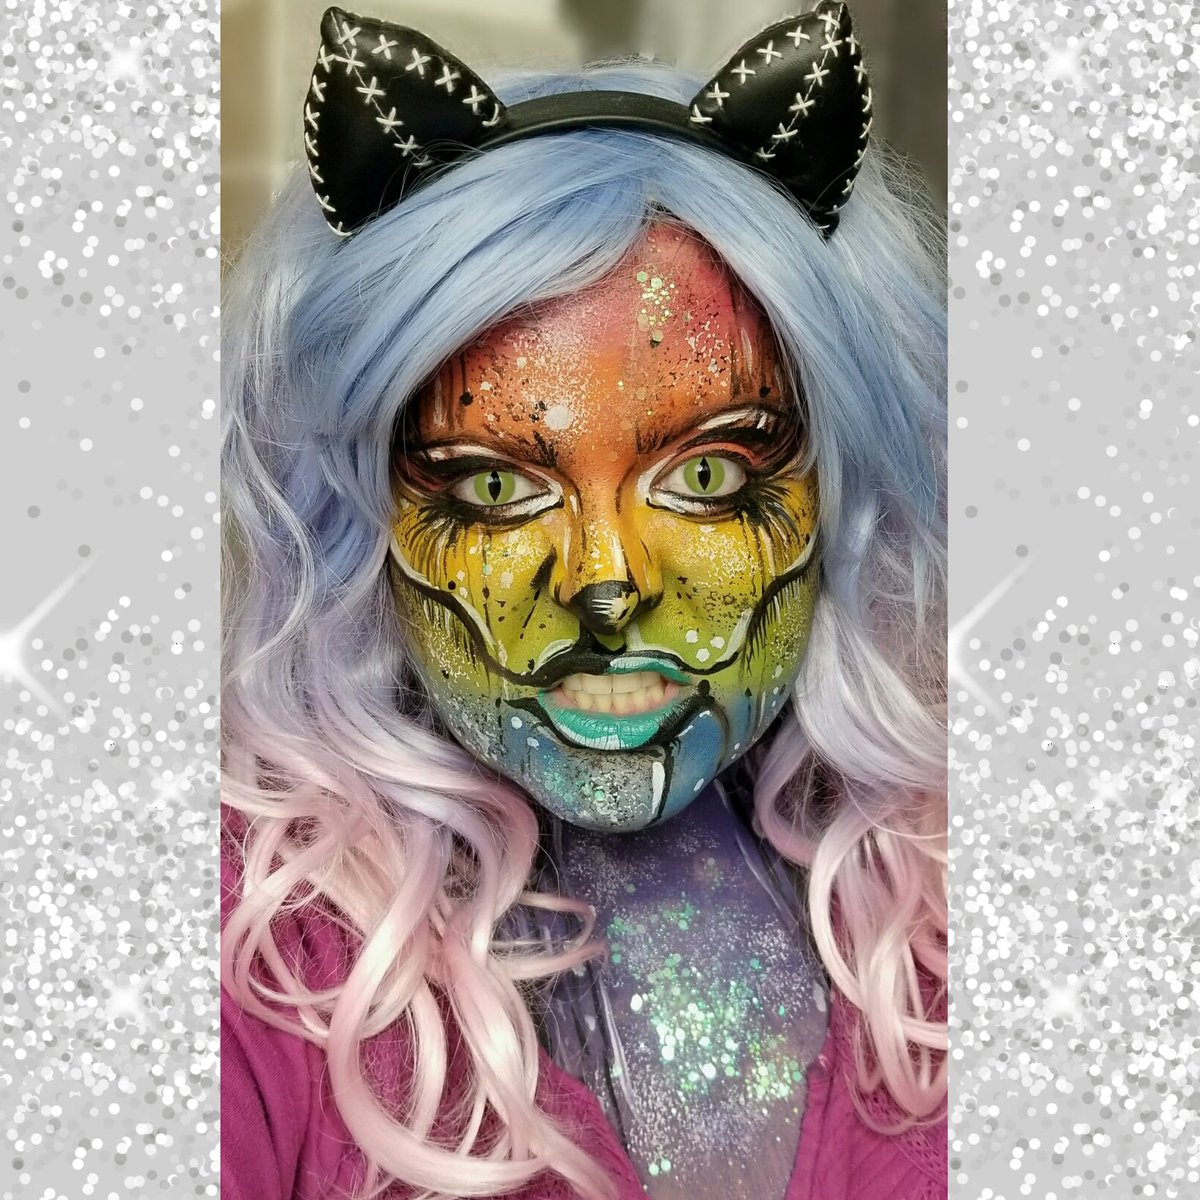 🌈 Fatal Curiosity, feelin' feline energy. Lookin' back at history, you'll always land on your feet...
HEY KITTY GIRL! IT'S YOUR WORLD! 🐱
@RuPaul 
 #pride #PrideMonth #loveislove 
Using @mehronmakeup @MeltCosmetics @RoyalLangnickel @PaintGlow IG: chaoticcomplexion